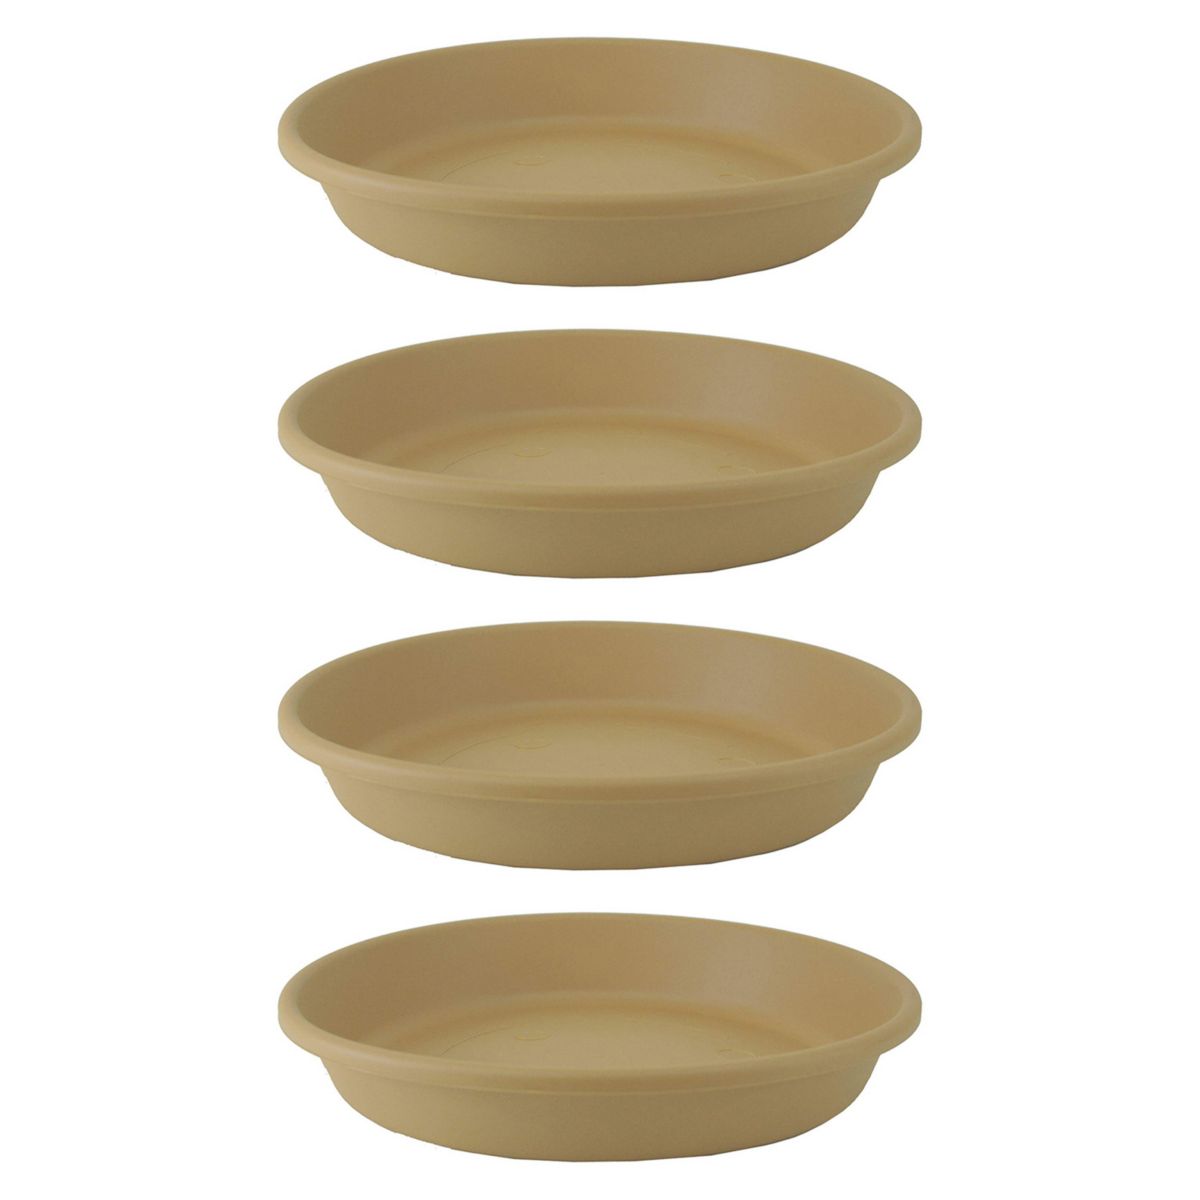 HC Companies Classic 24 Inch Round Flower Pot Plant Saucer, Sandstone (4 Pack) The HC Companies